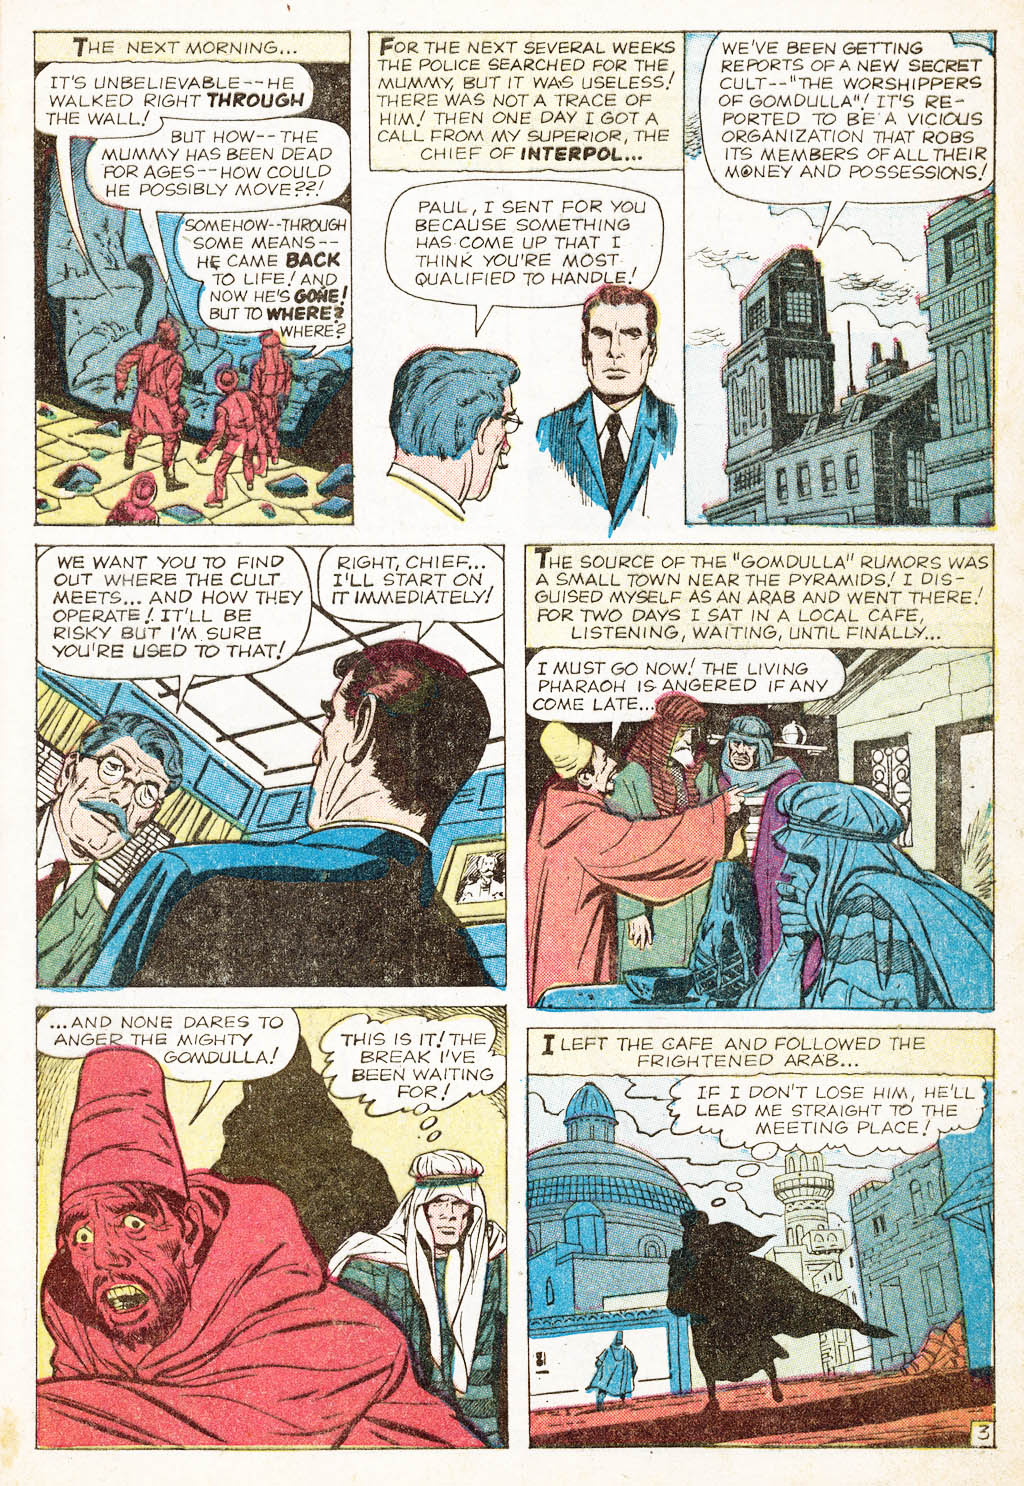 Journey Into Mystery (1952) 61 Page 4